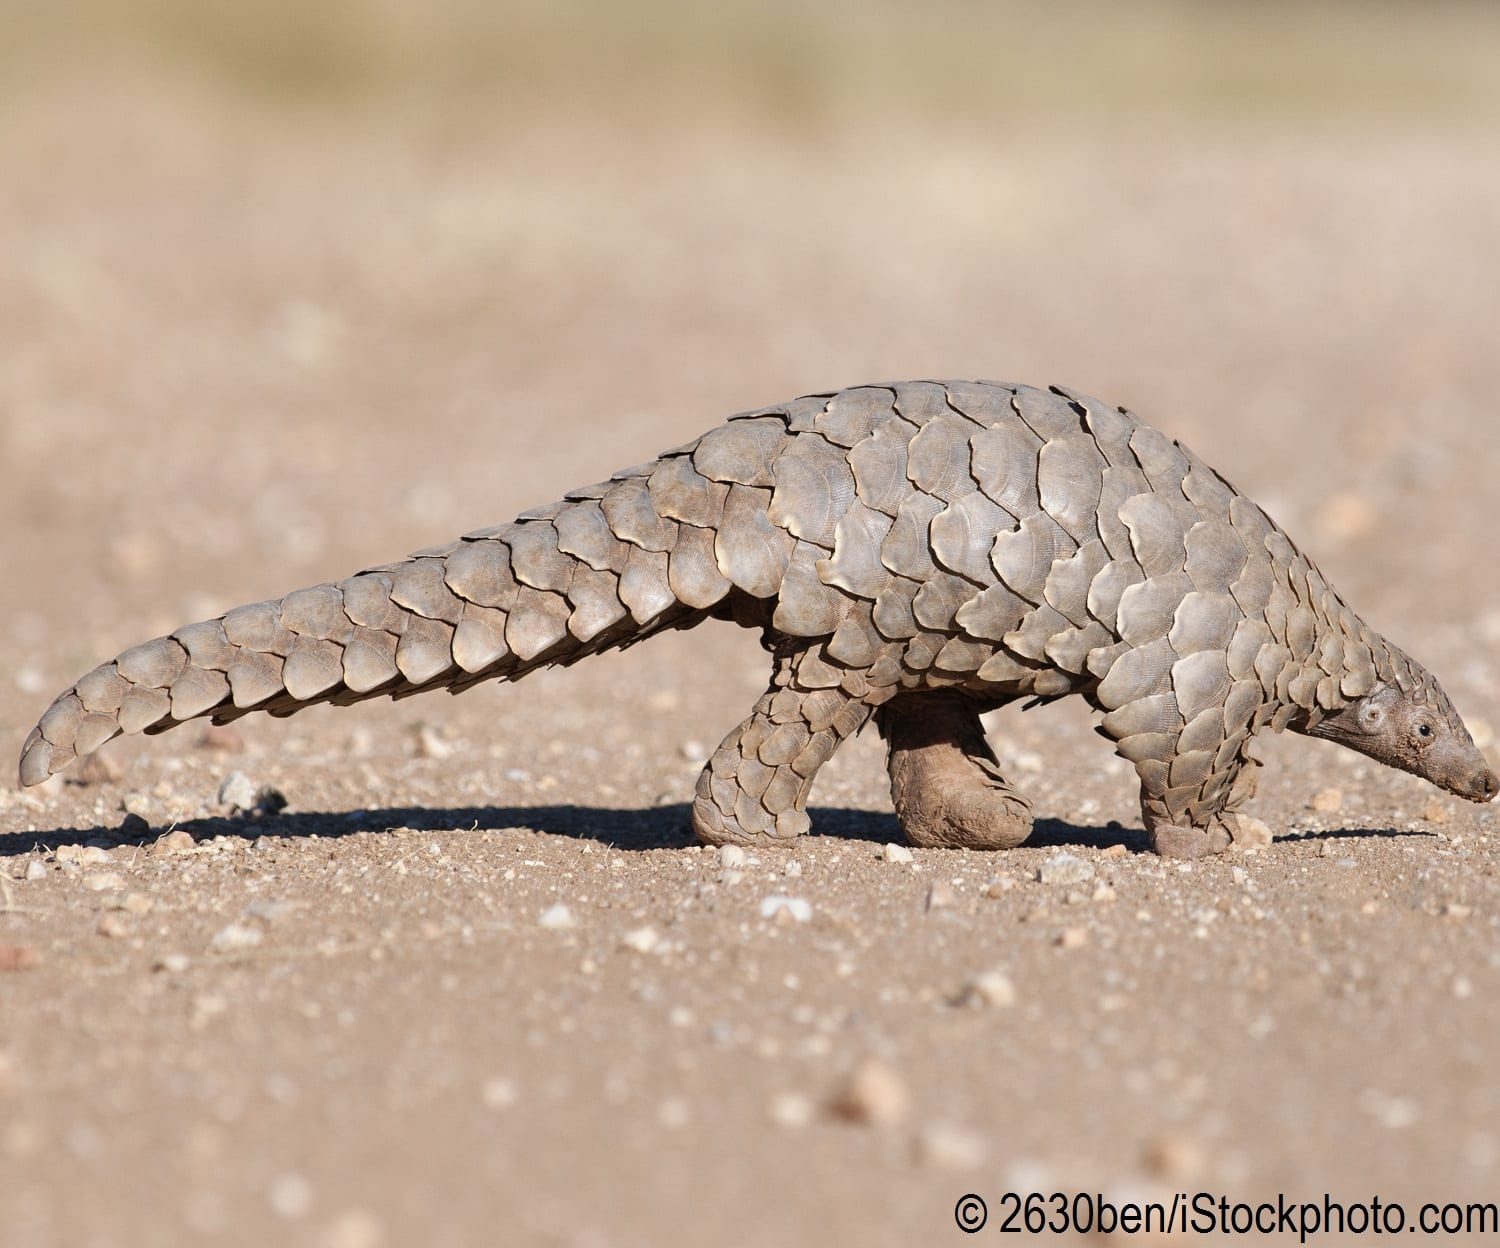 A pangolin hunting for ants in the dirt.